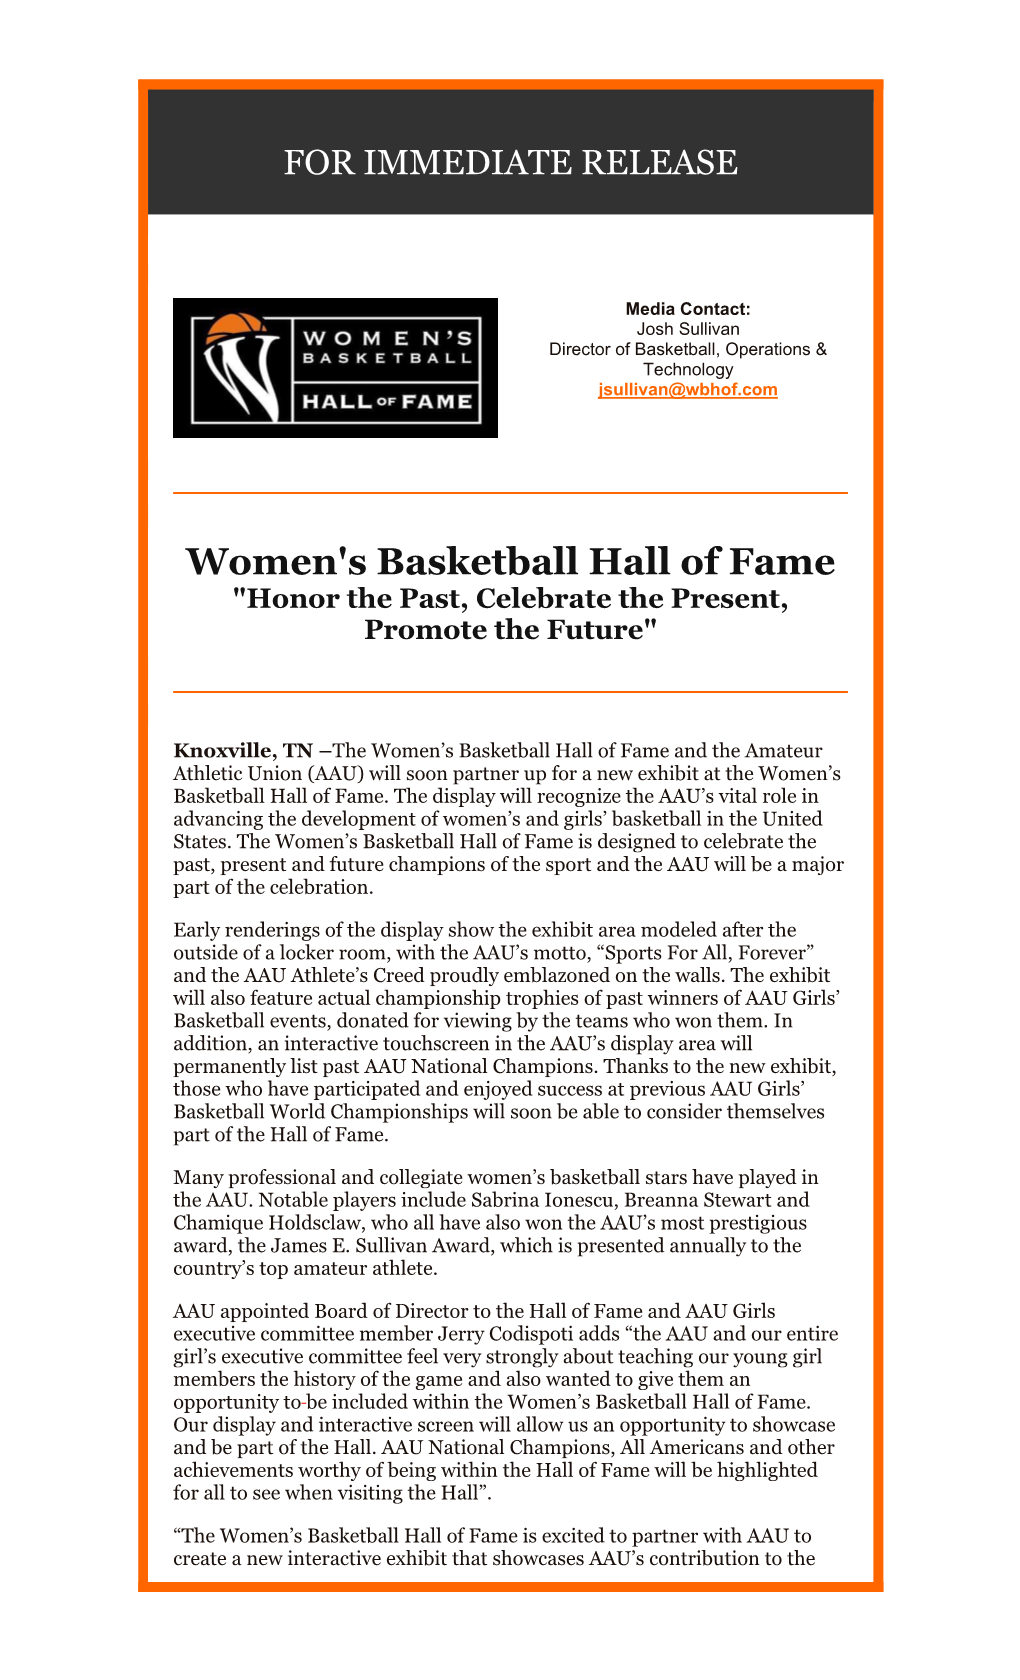 Women's Basketball Hall of Fame "Honor the Past, Celebrate the Present, Promote the Future"